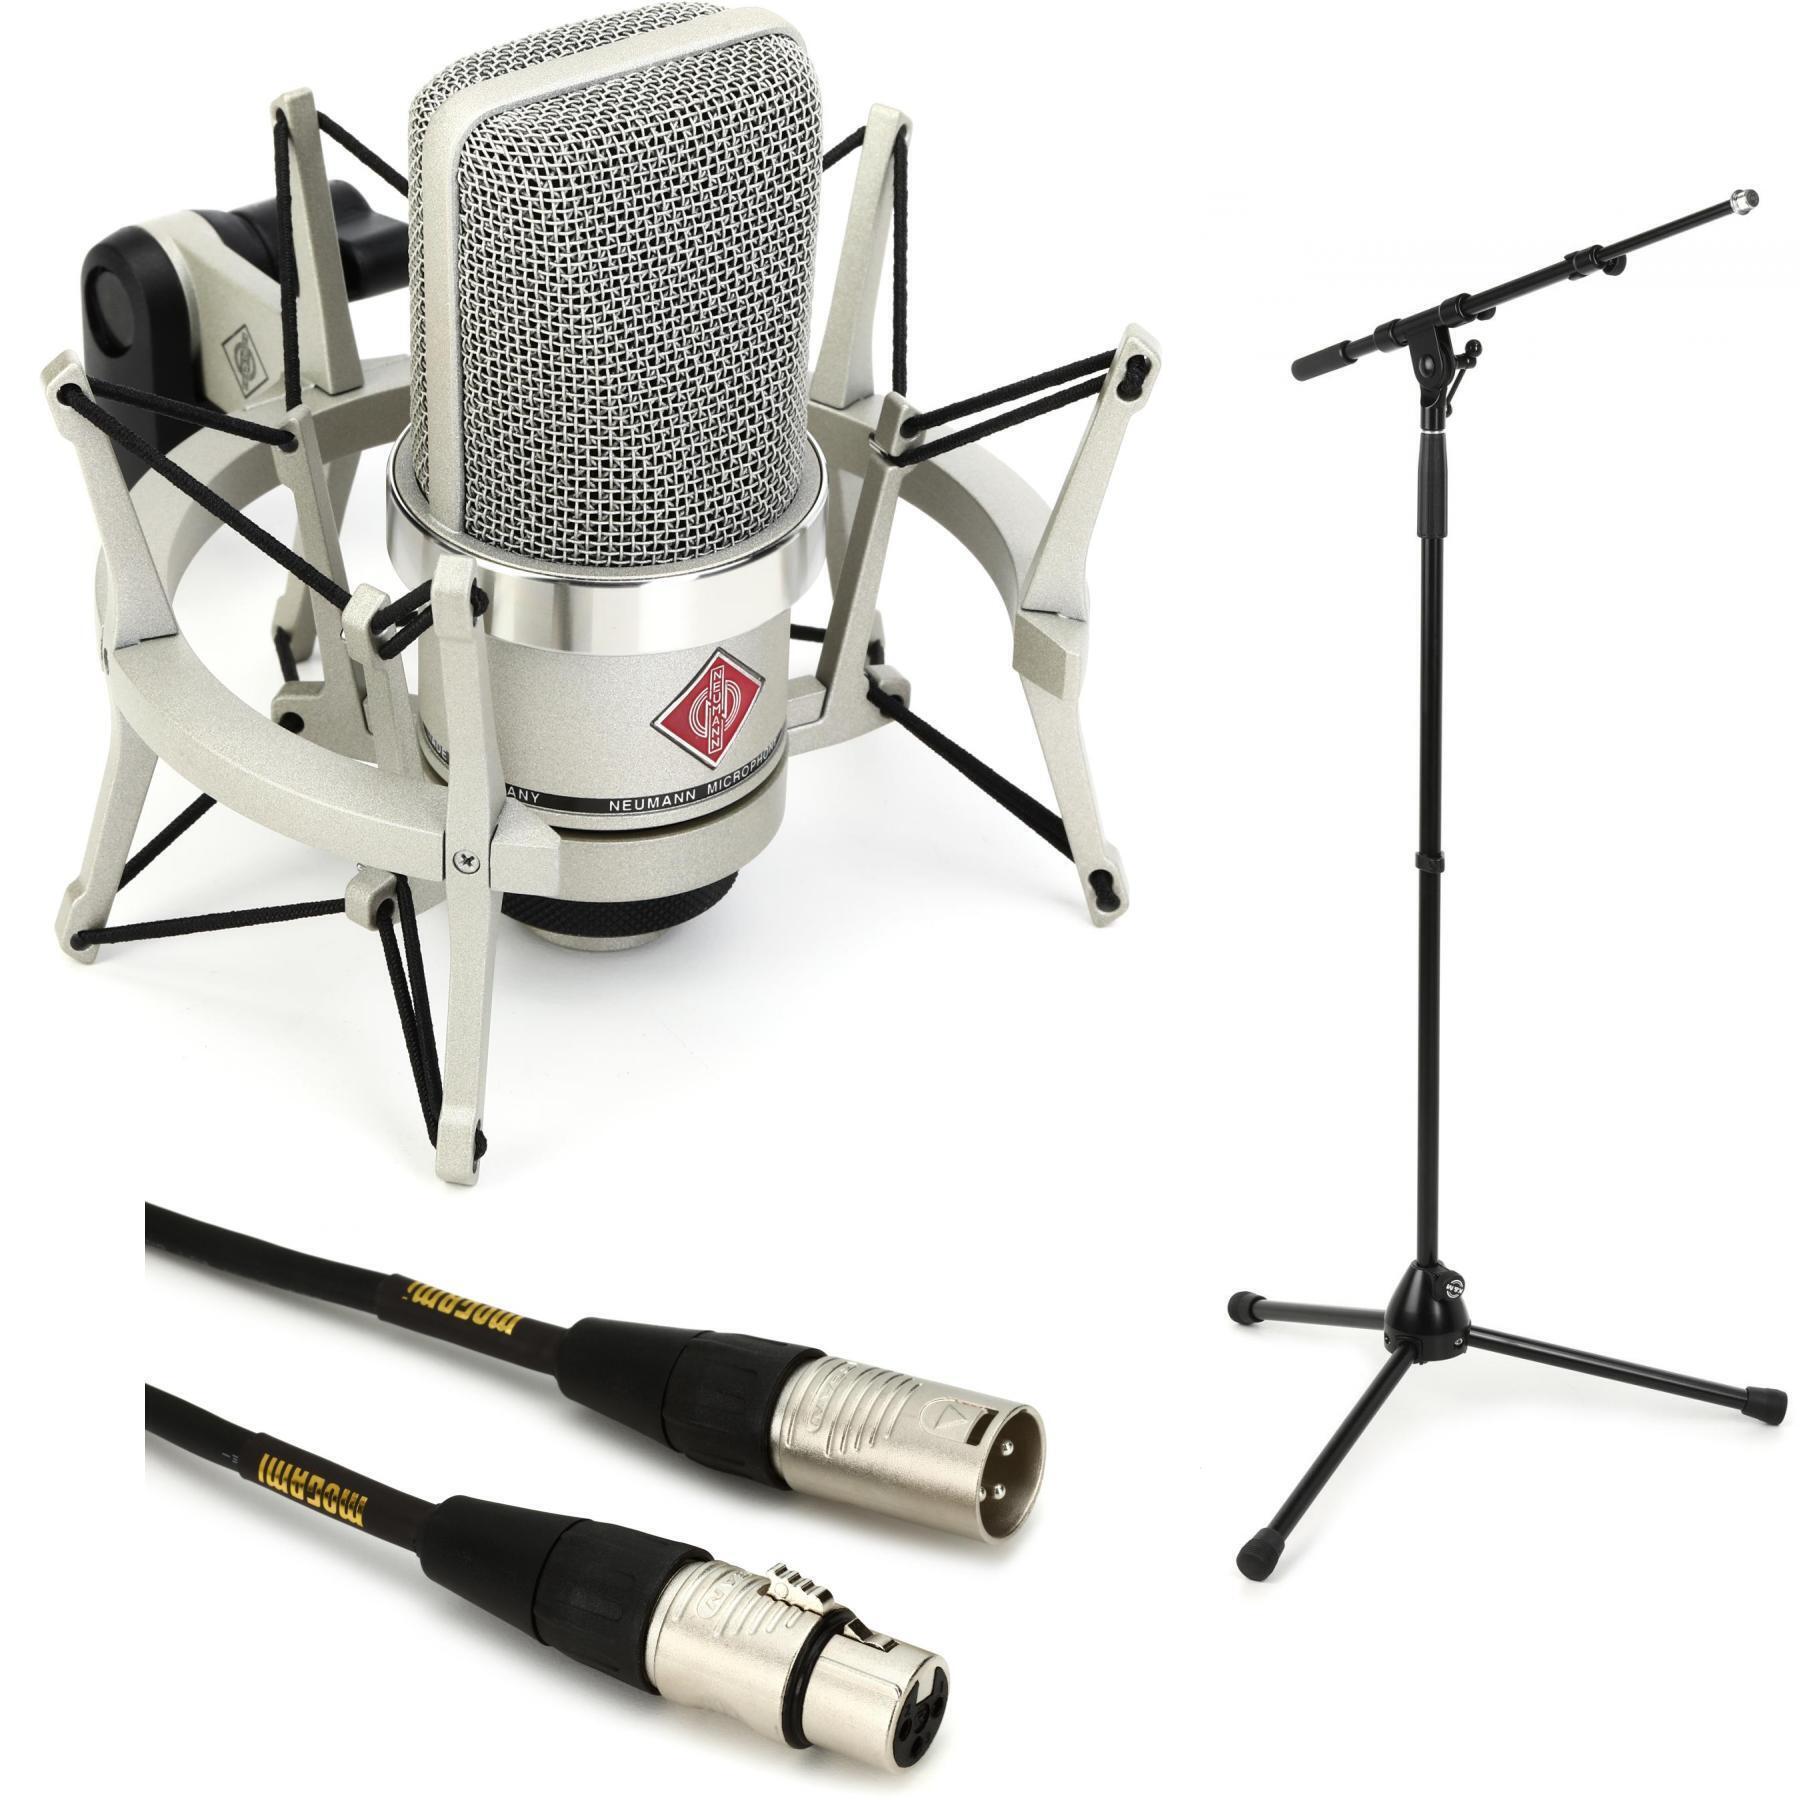 Neumann TLM 102 Studio Set Bundle with Stand and Cable - Nickel